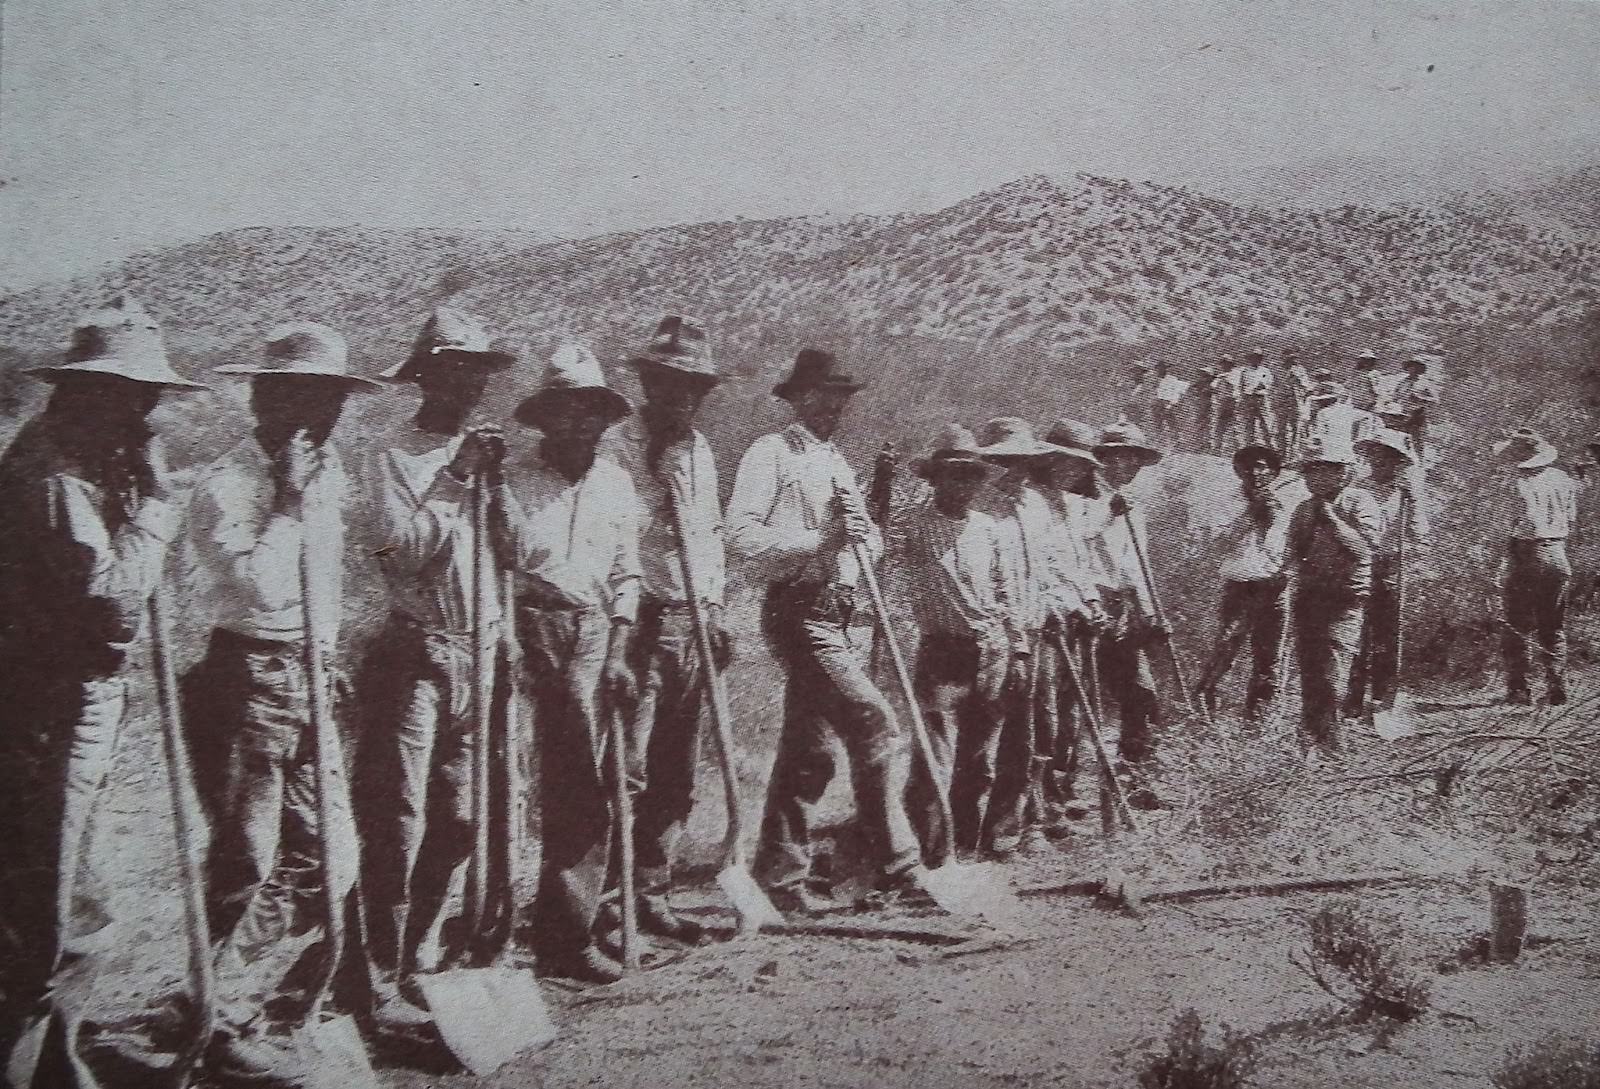 Apache Indian workers in Arizona.